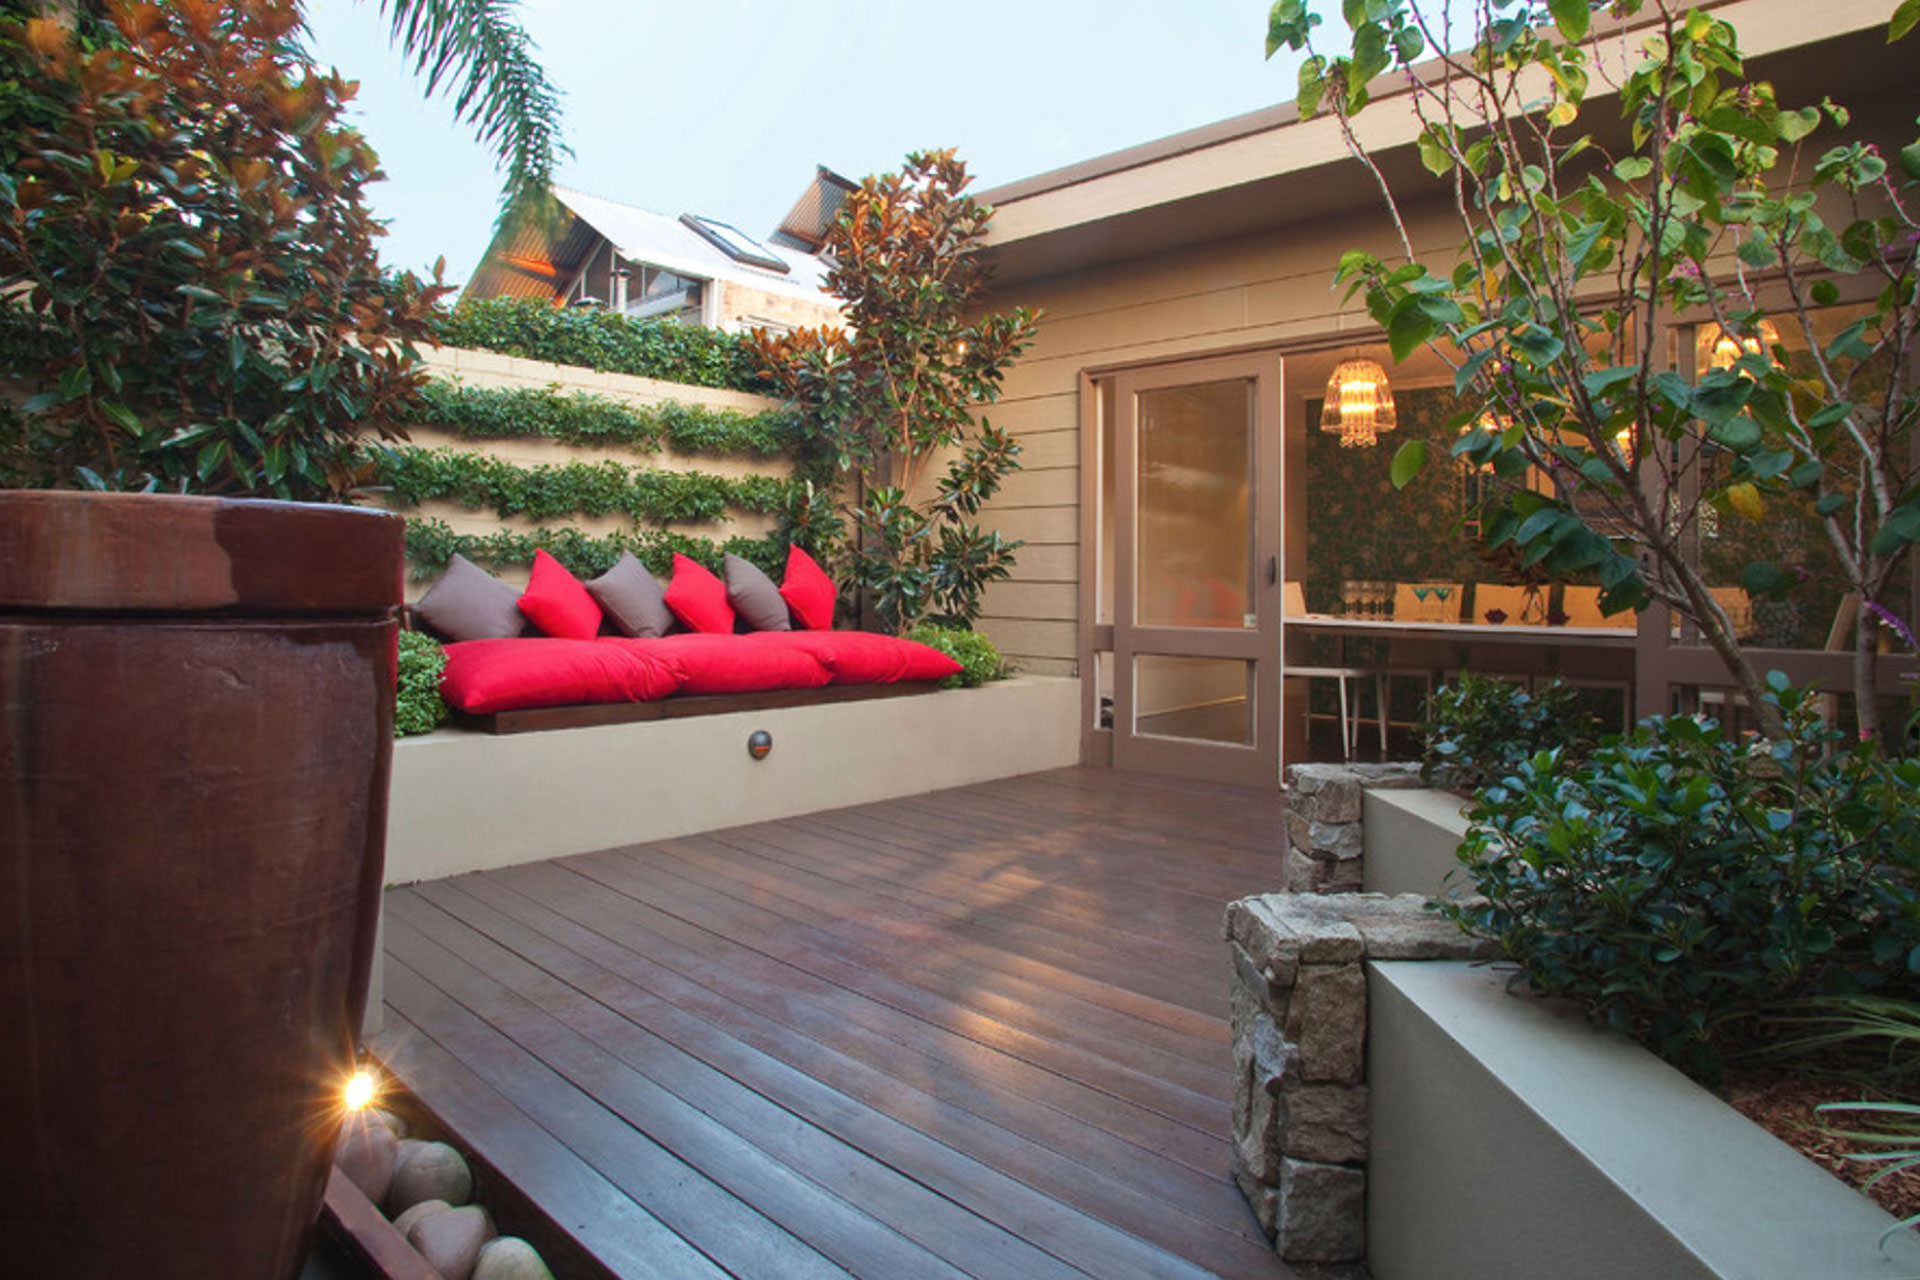 5 Ideas for Making a Big Impact in a Small Outdoor Space